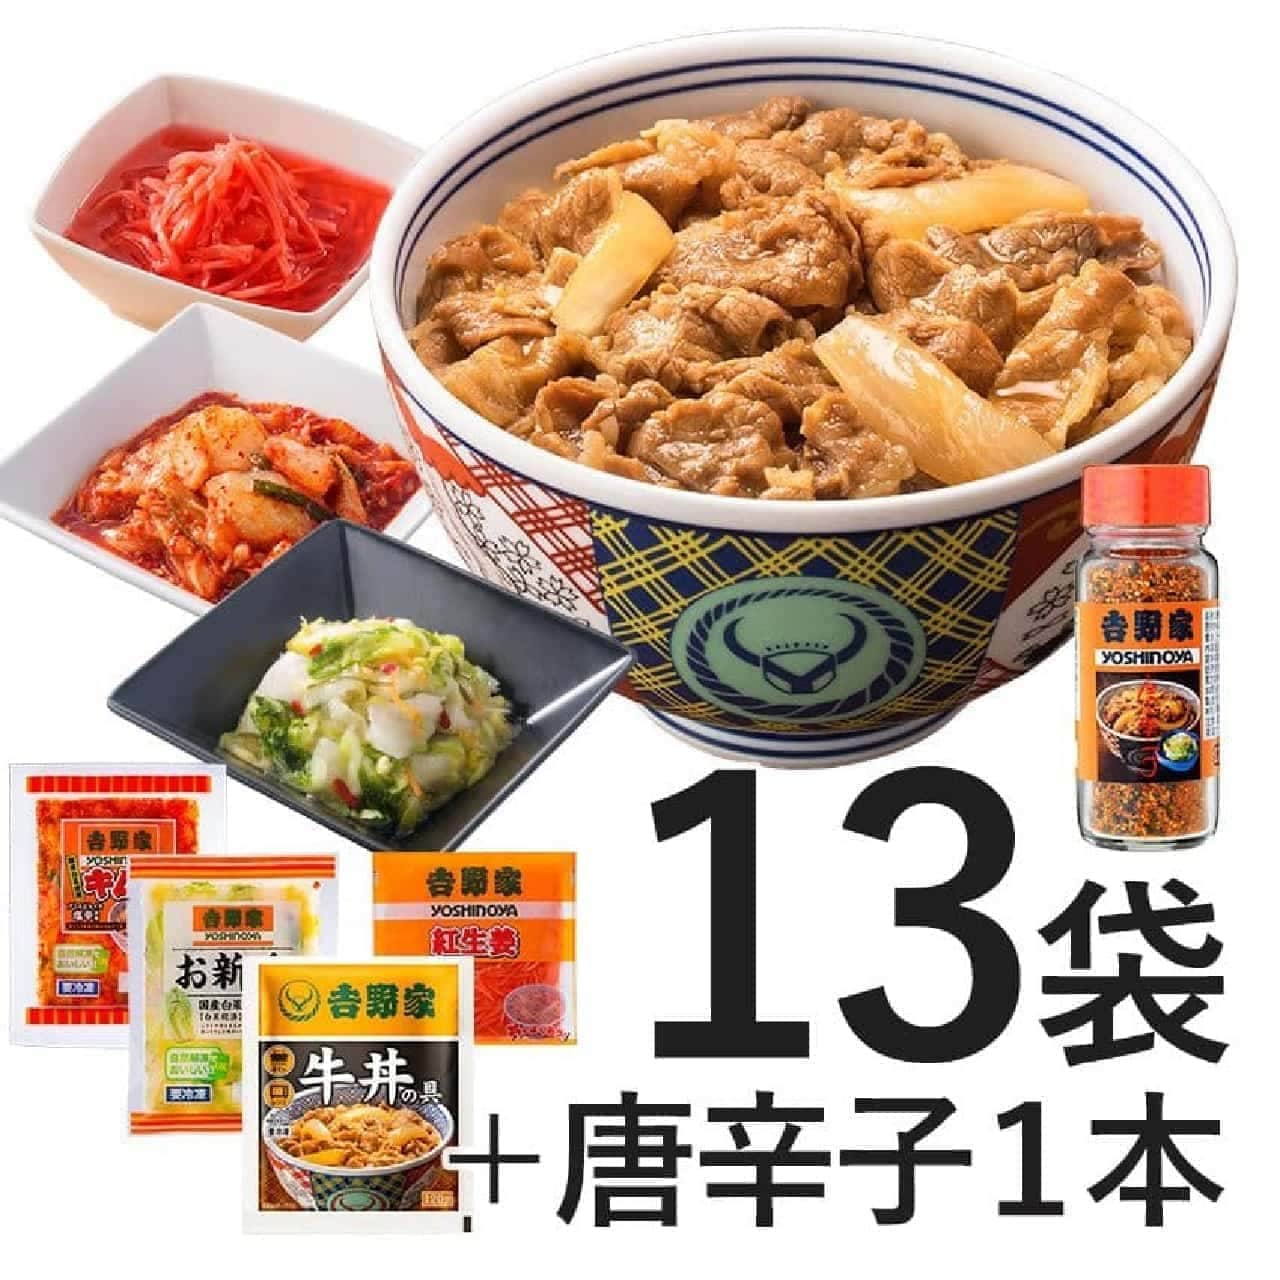 Yoshinoya official mail order store "Topping Eating Comparison Set".